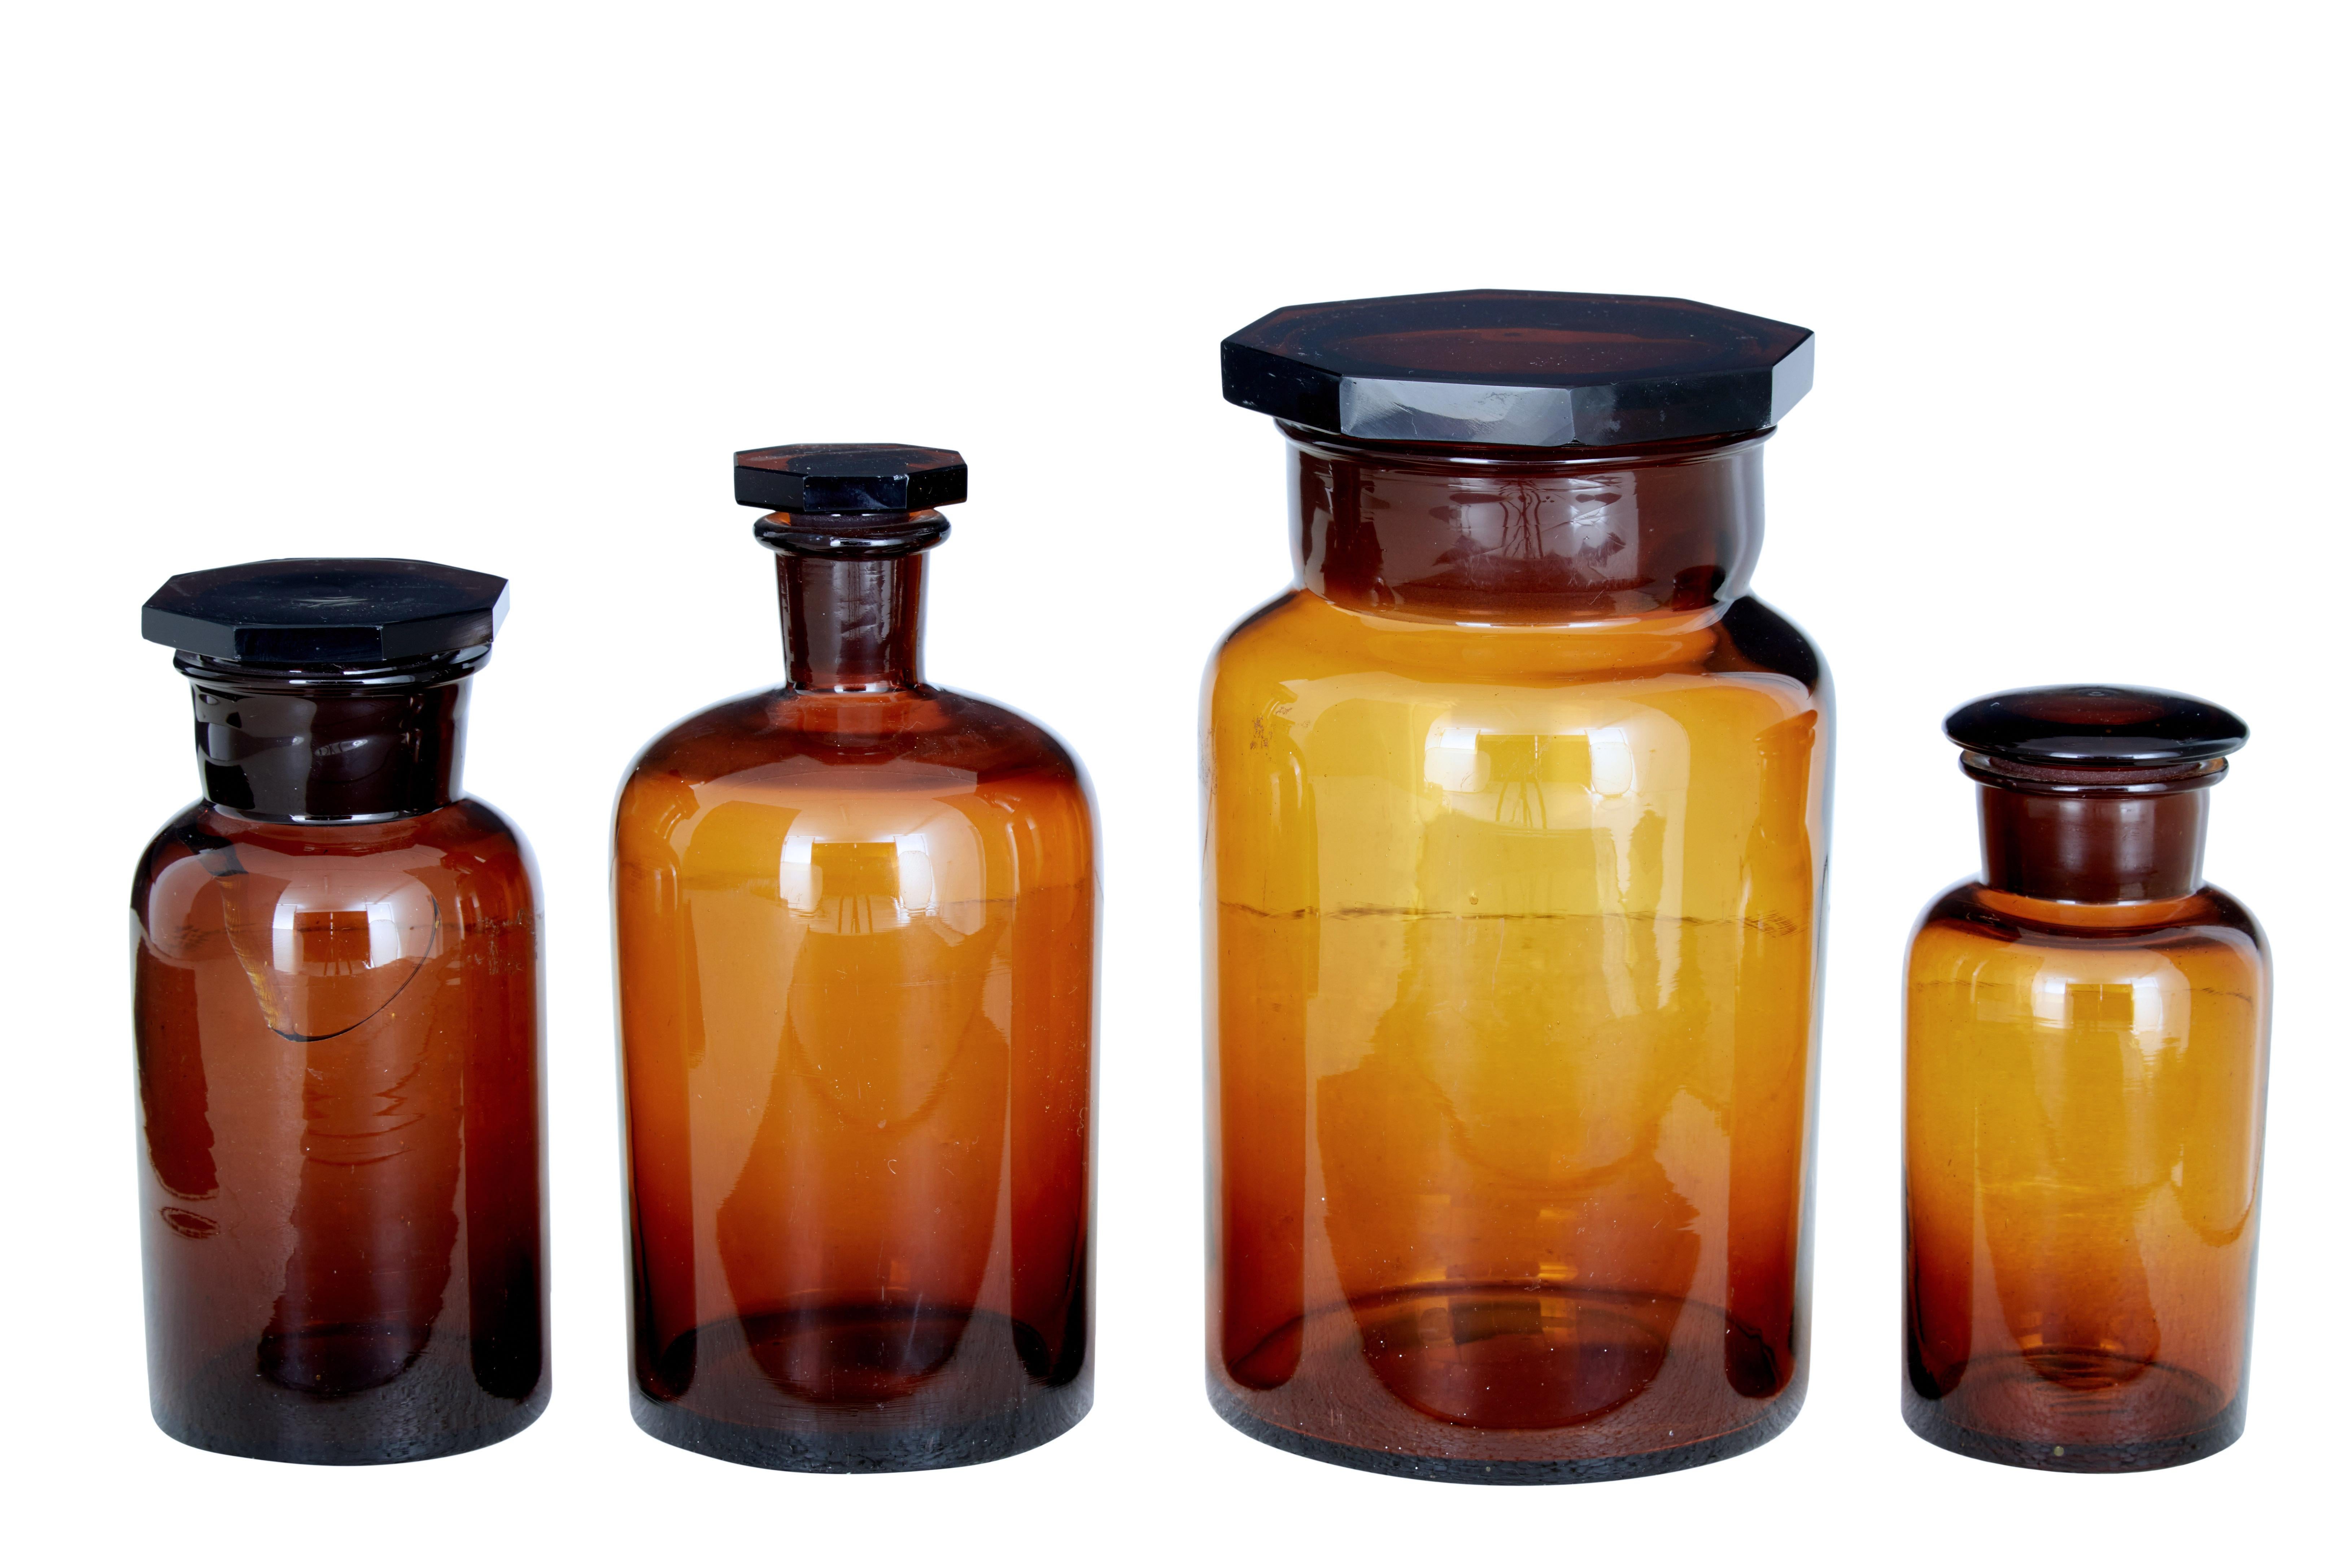 Set of 12 early 20th century apothecary glass jars, circa 1920.

Various sized jars all with stoppers and lids, labelled with Scandinavian text. Fine decorative items.

1 bottle with crack which is photographed.

Measures: Smallest height 3